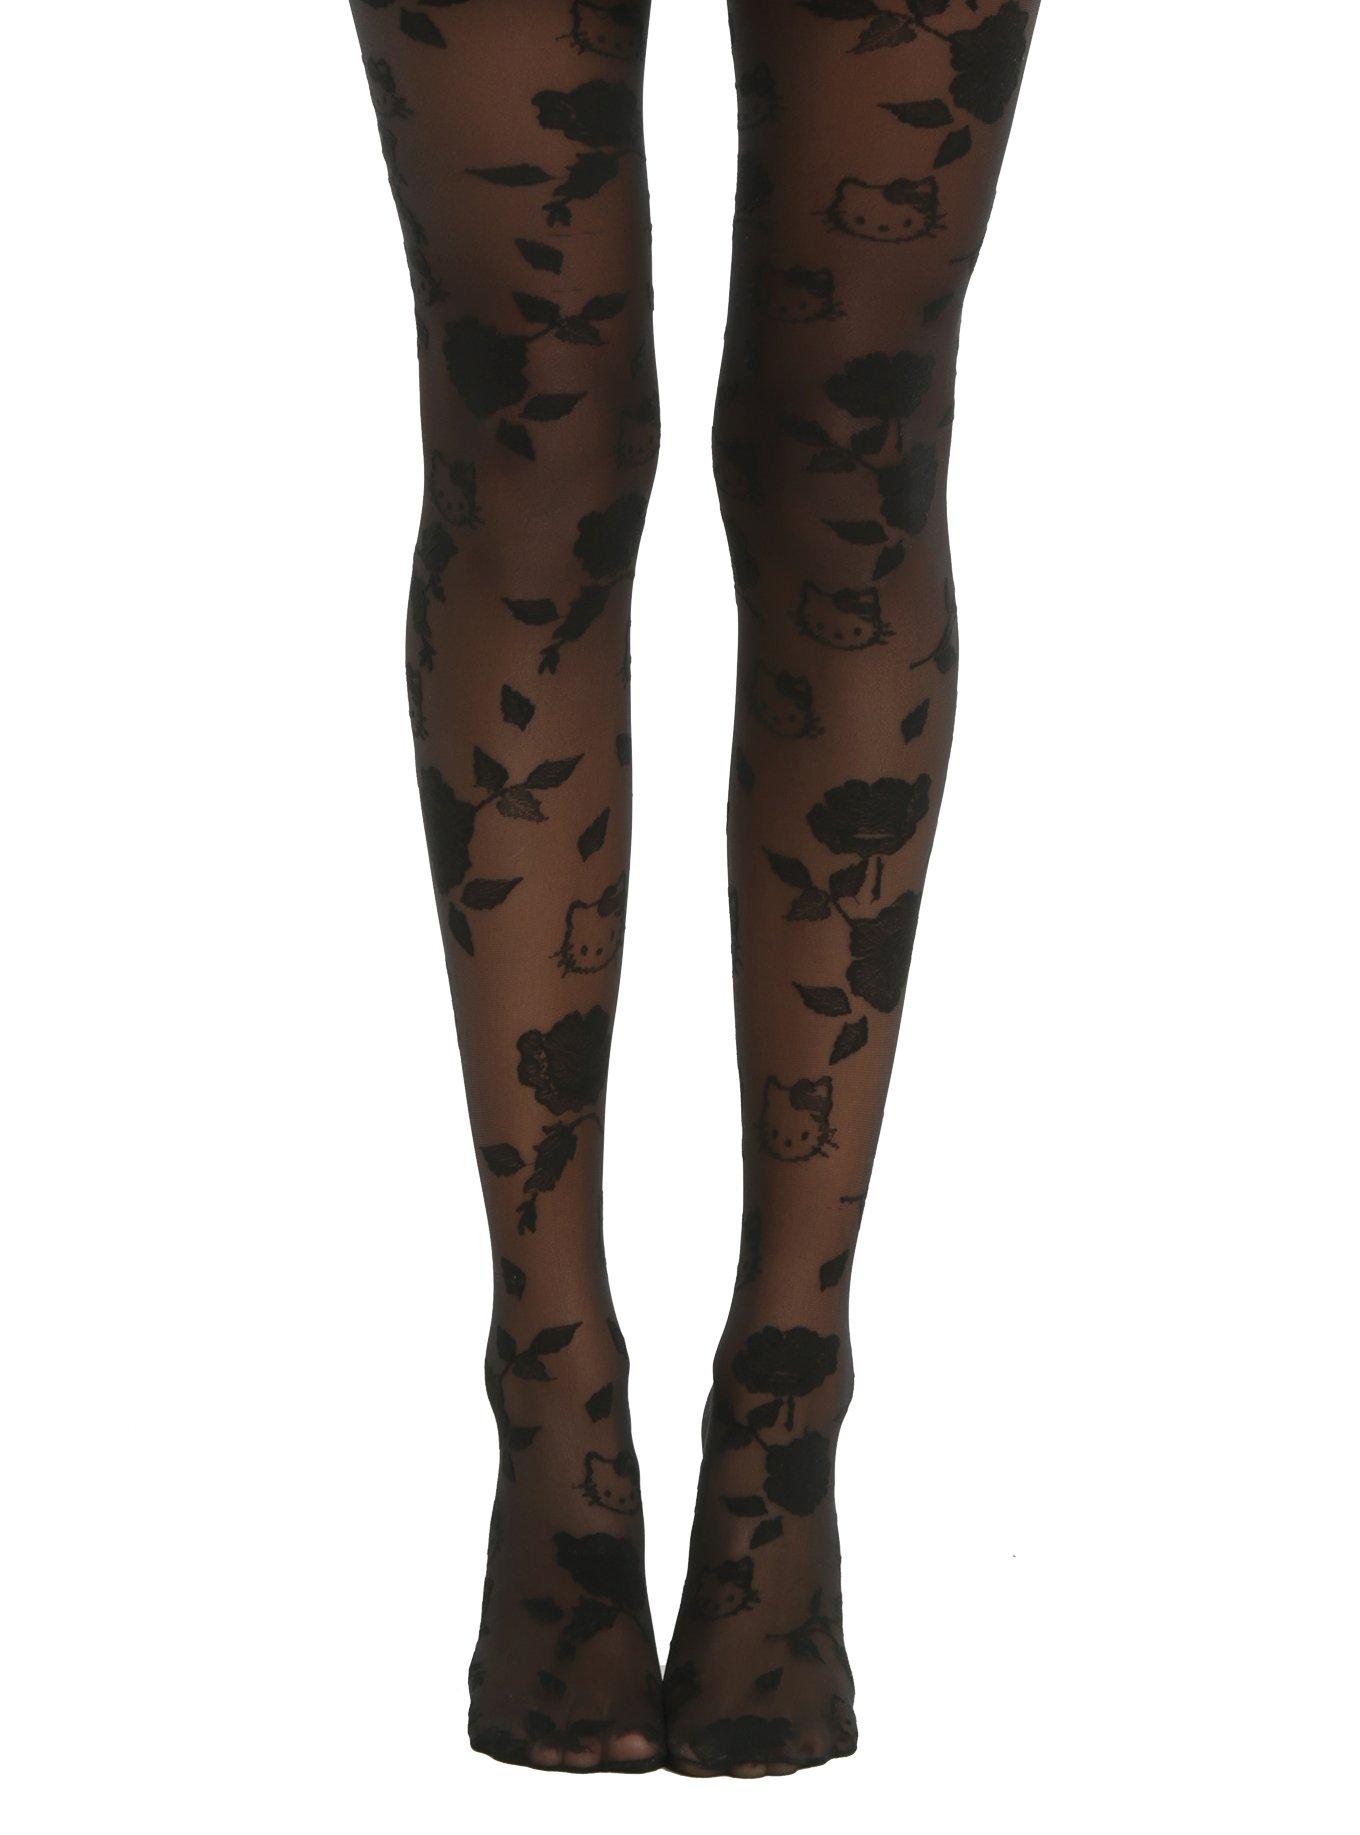 Hello Kitty Over Knee High Tights Stockings 80Denier Black Sanrio Inspired  by You.